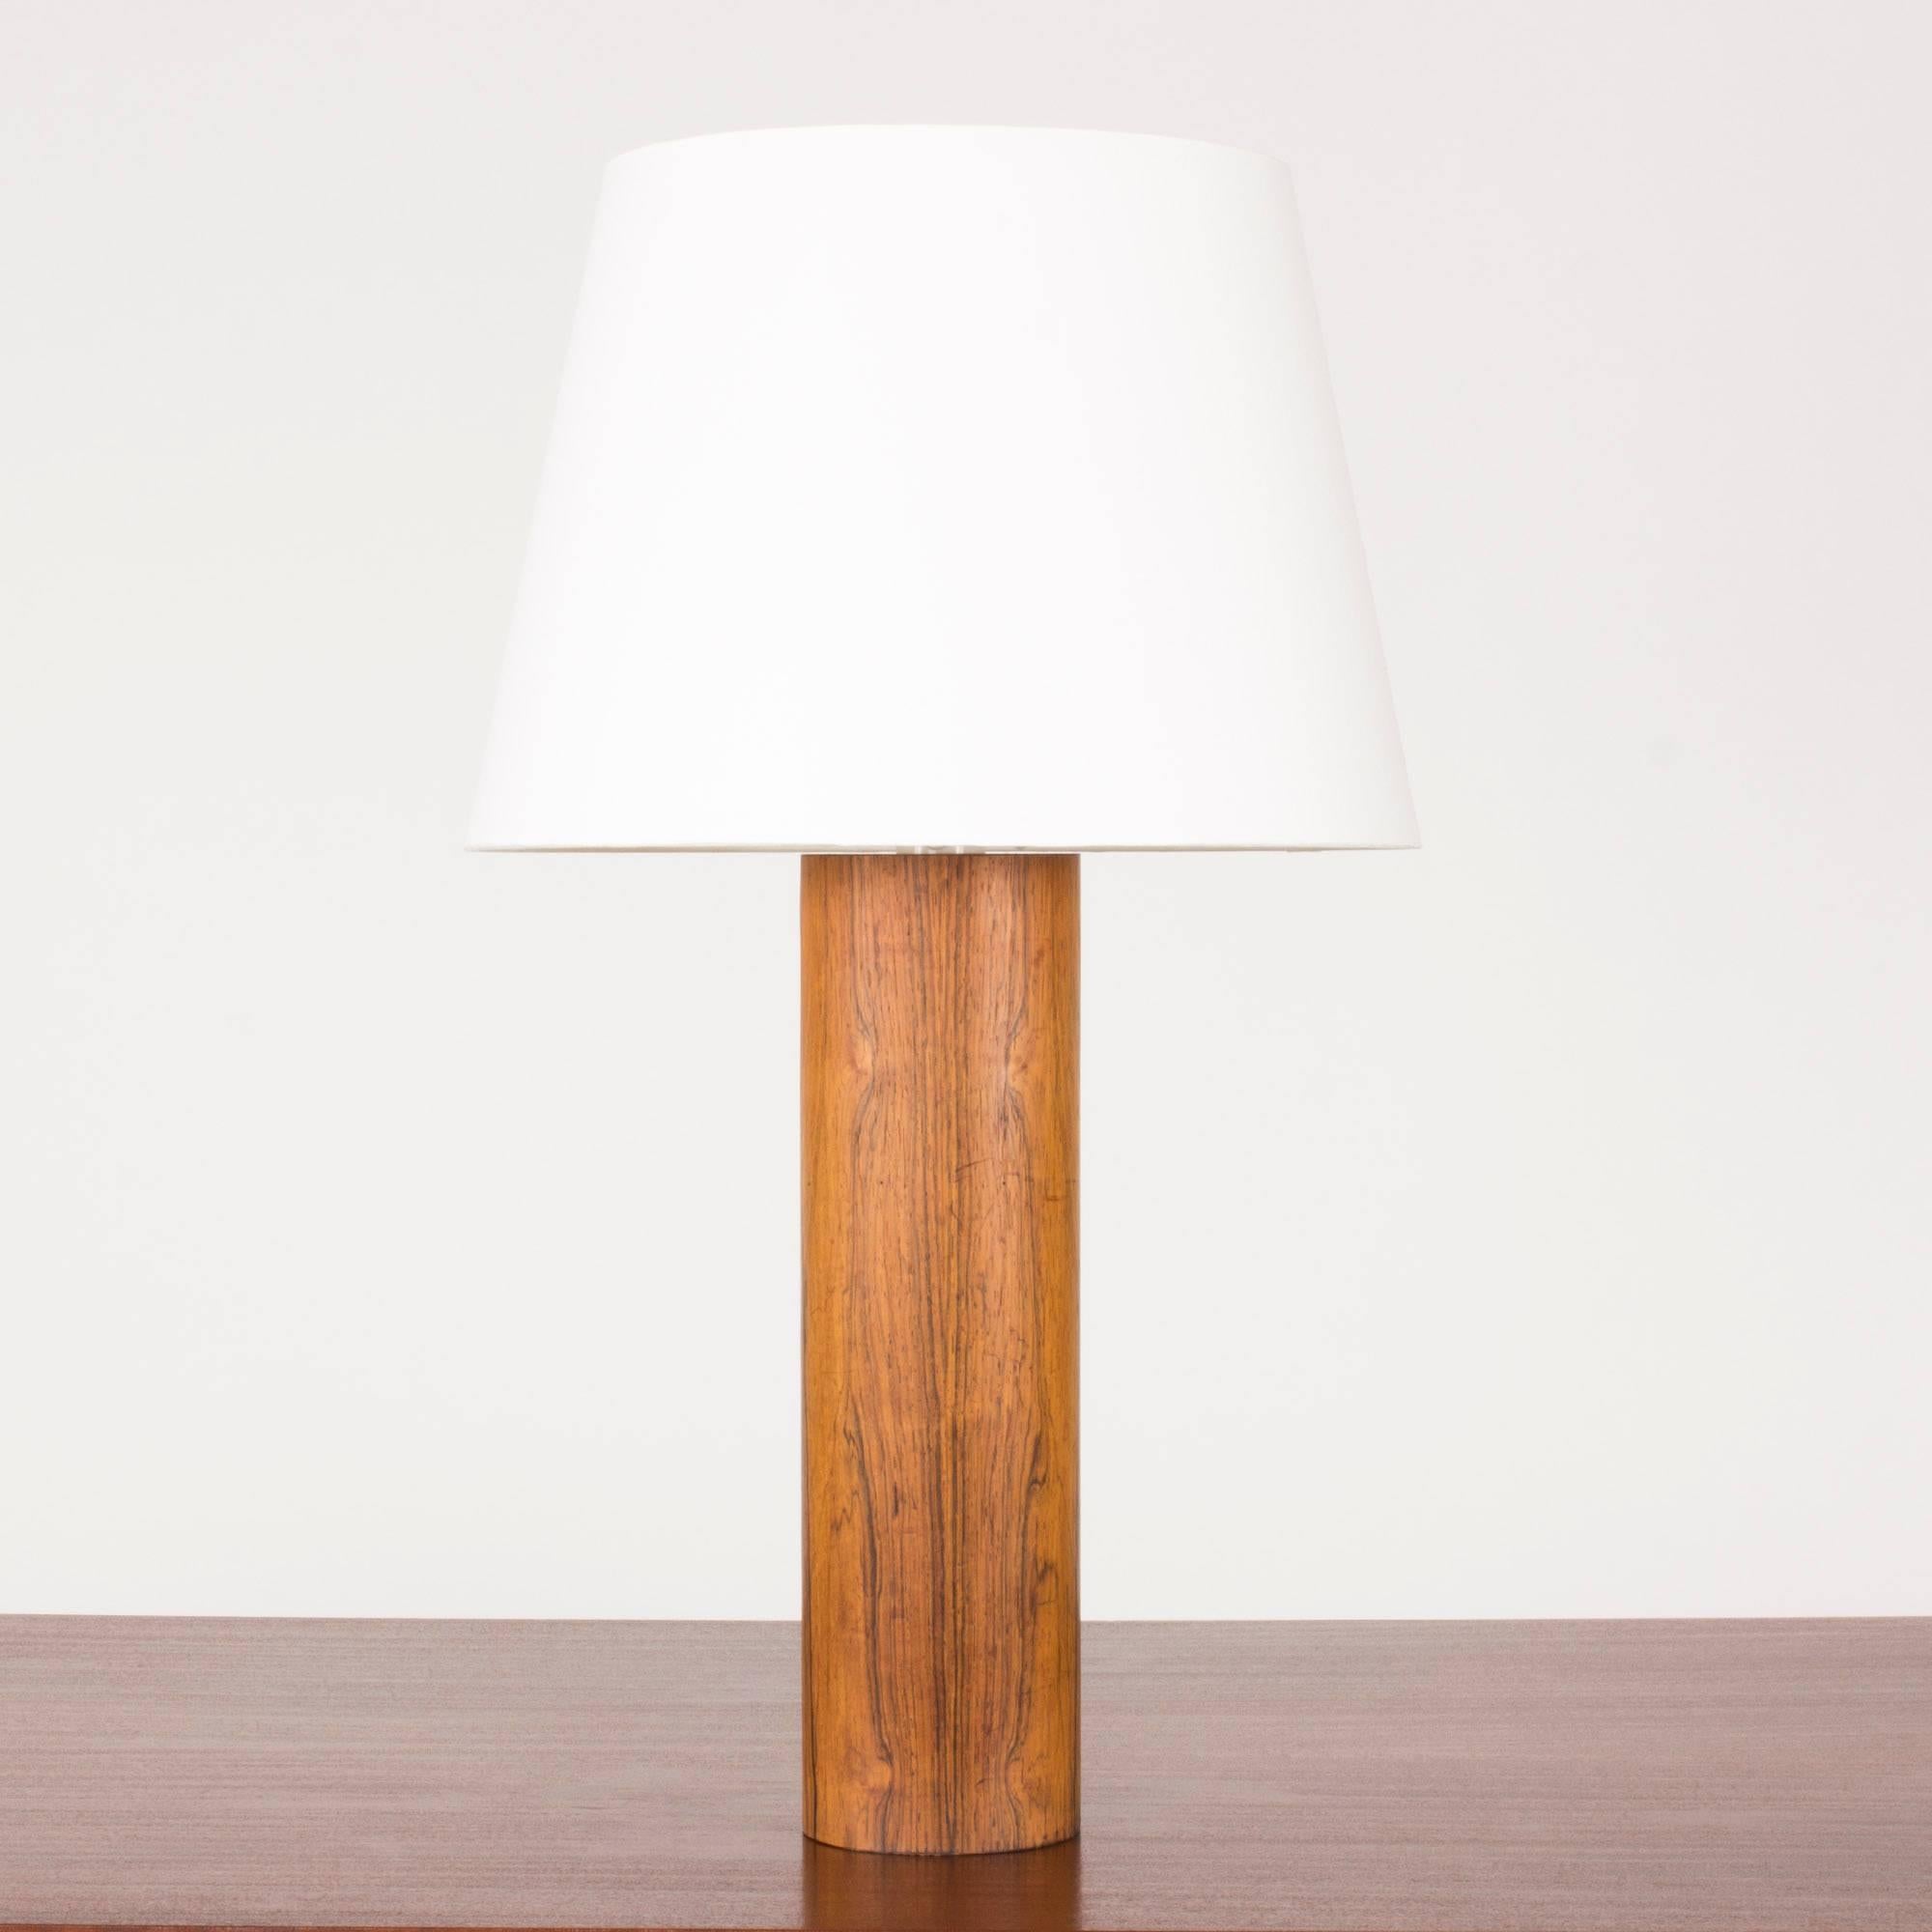 Very cool table lamp by Uno & Östen Kristiansson, with a solid rosewood base. Tall size and great wood grain.

Base measures 10 cm in diameter.